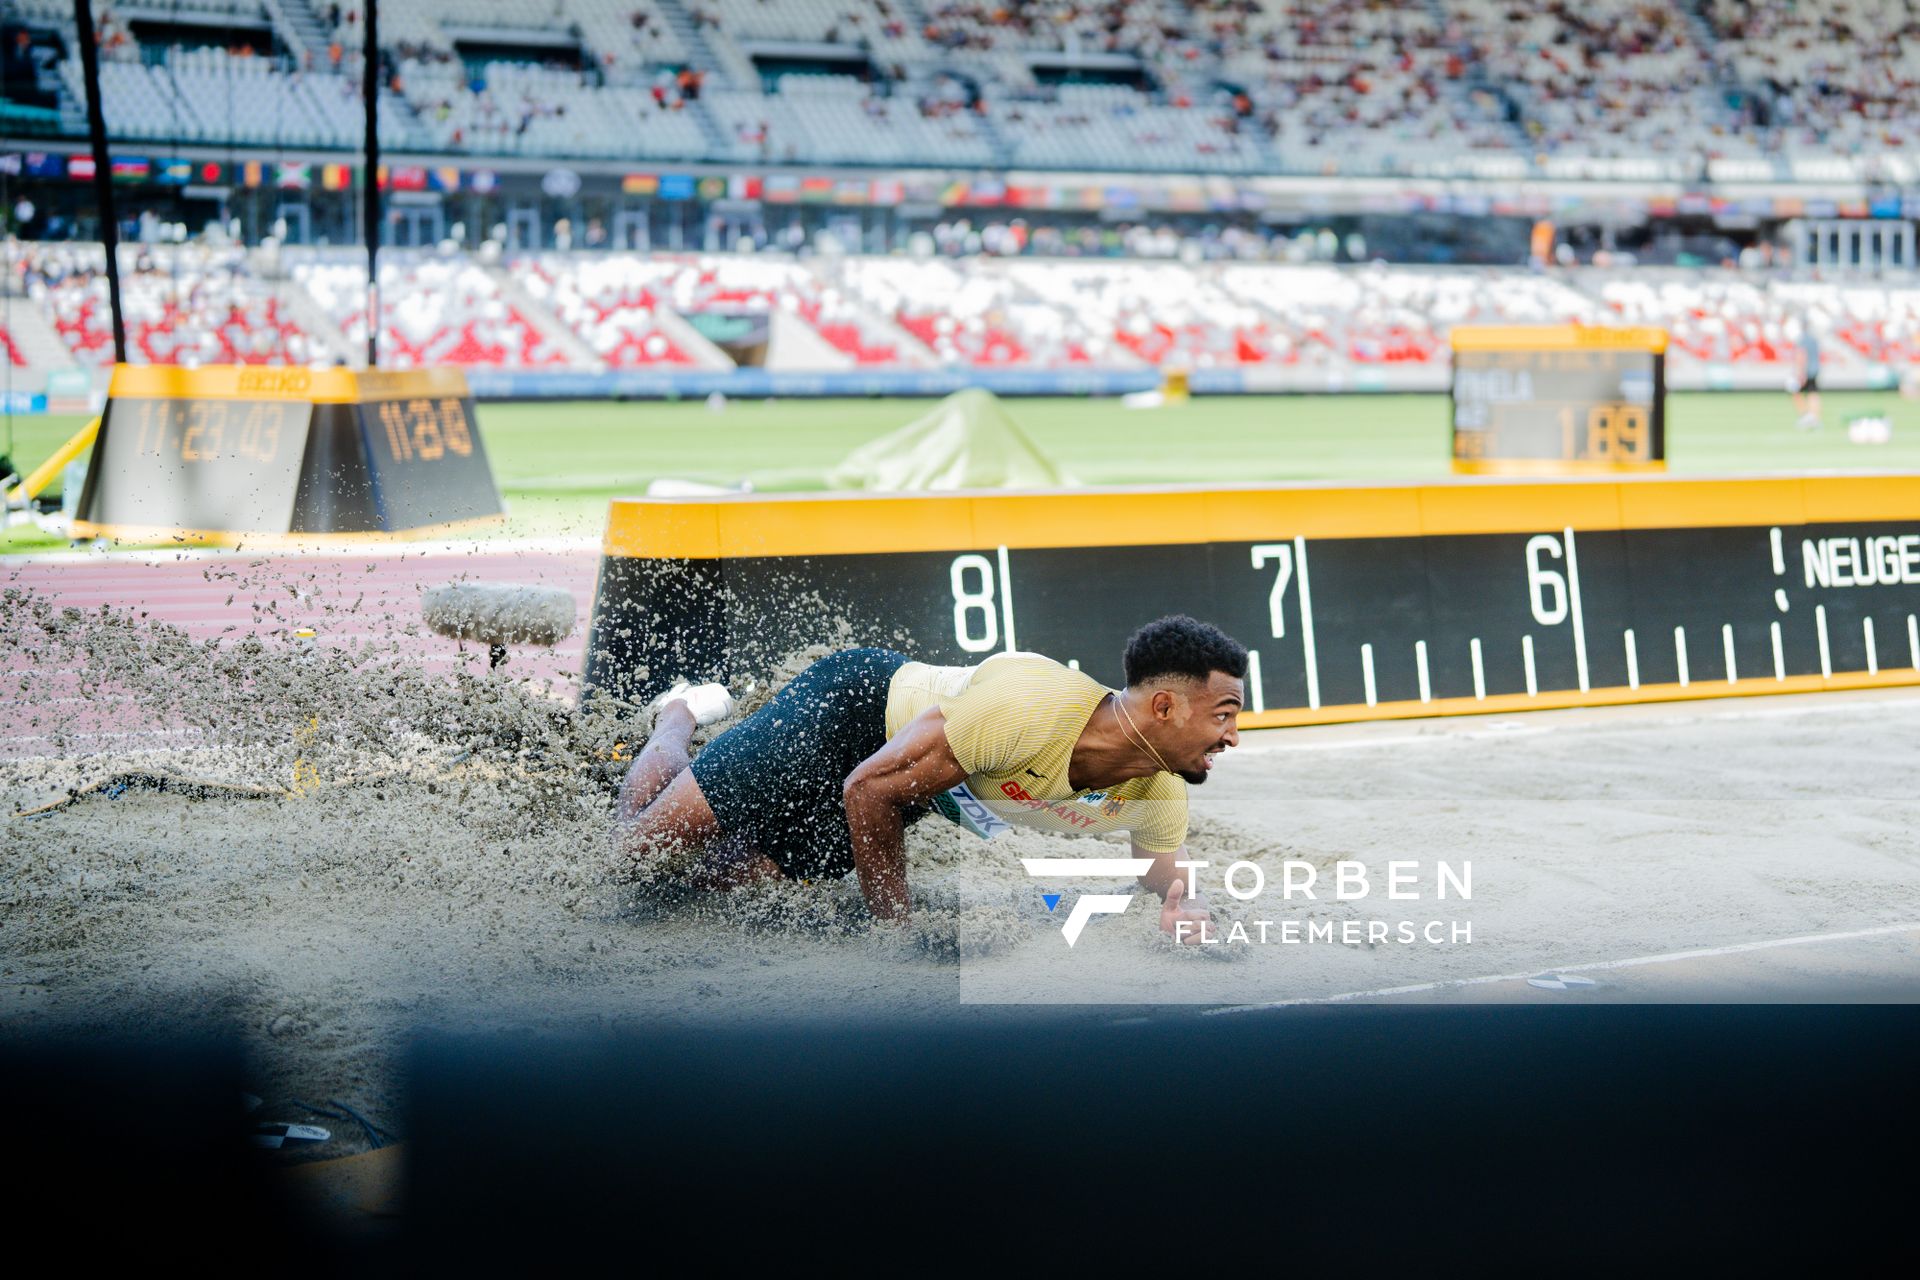 Leo Neugebauer (GER/Germany) during the Decathlon Long Jump on Day 6 of the World Athletics Championships Budapest 23 at the National Athletics Centre in Budapest, Hungary on August 24, 2023.